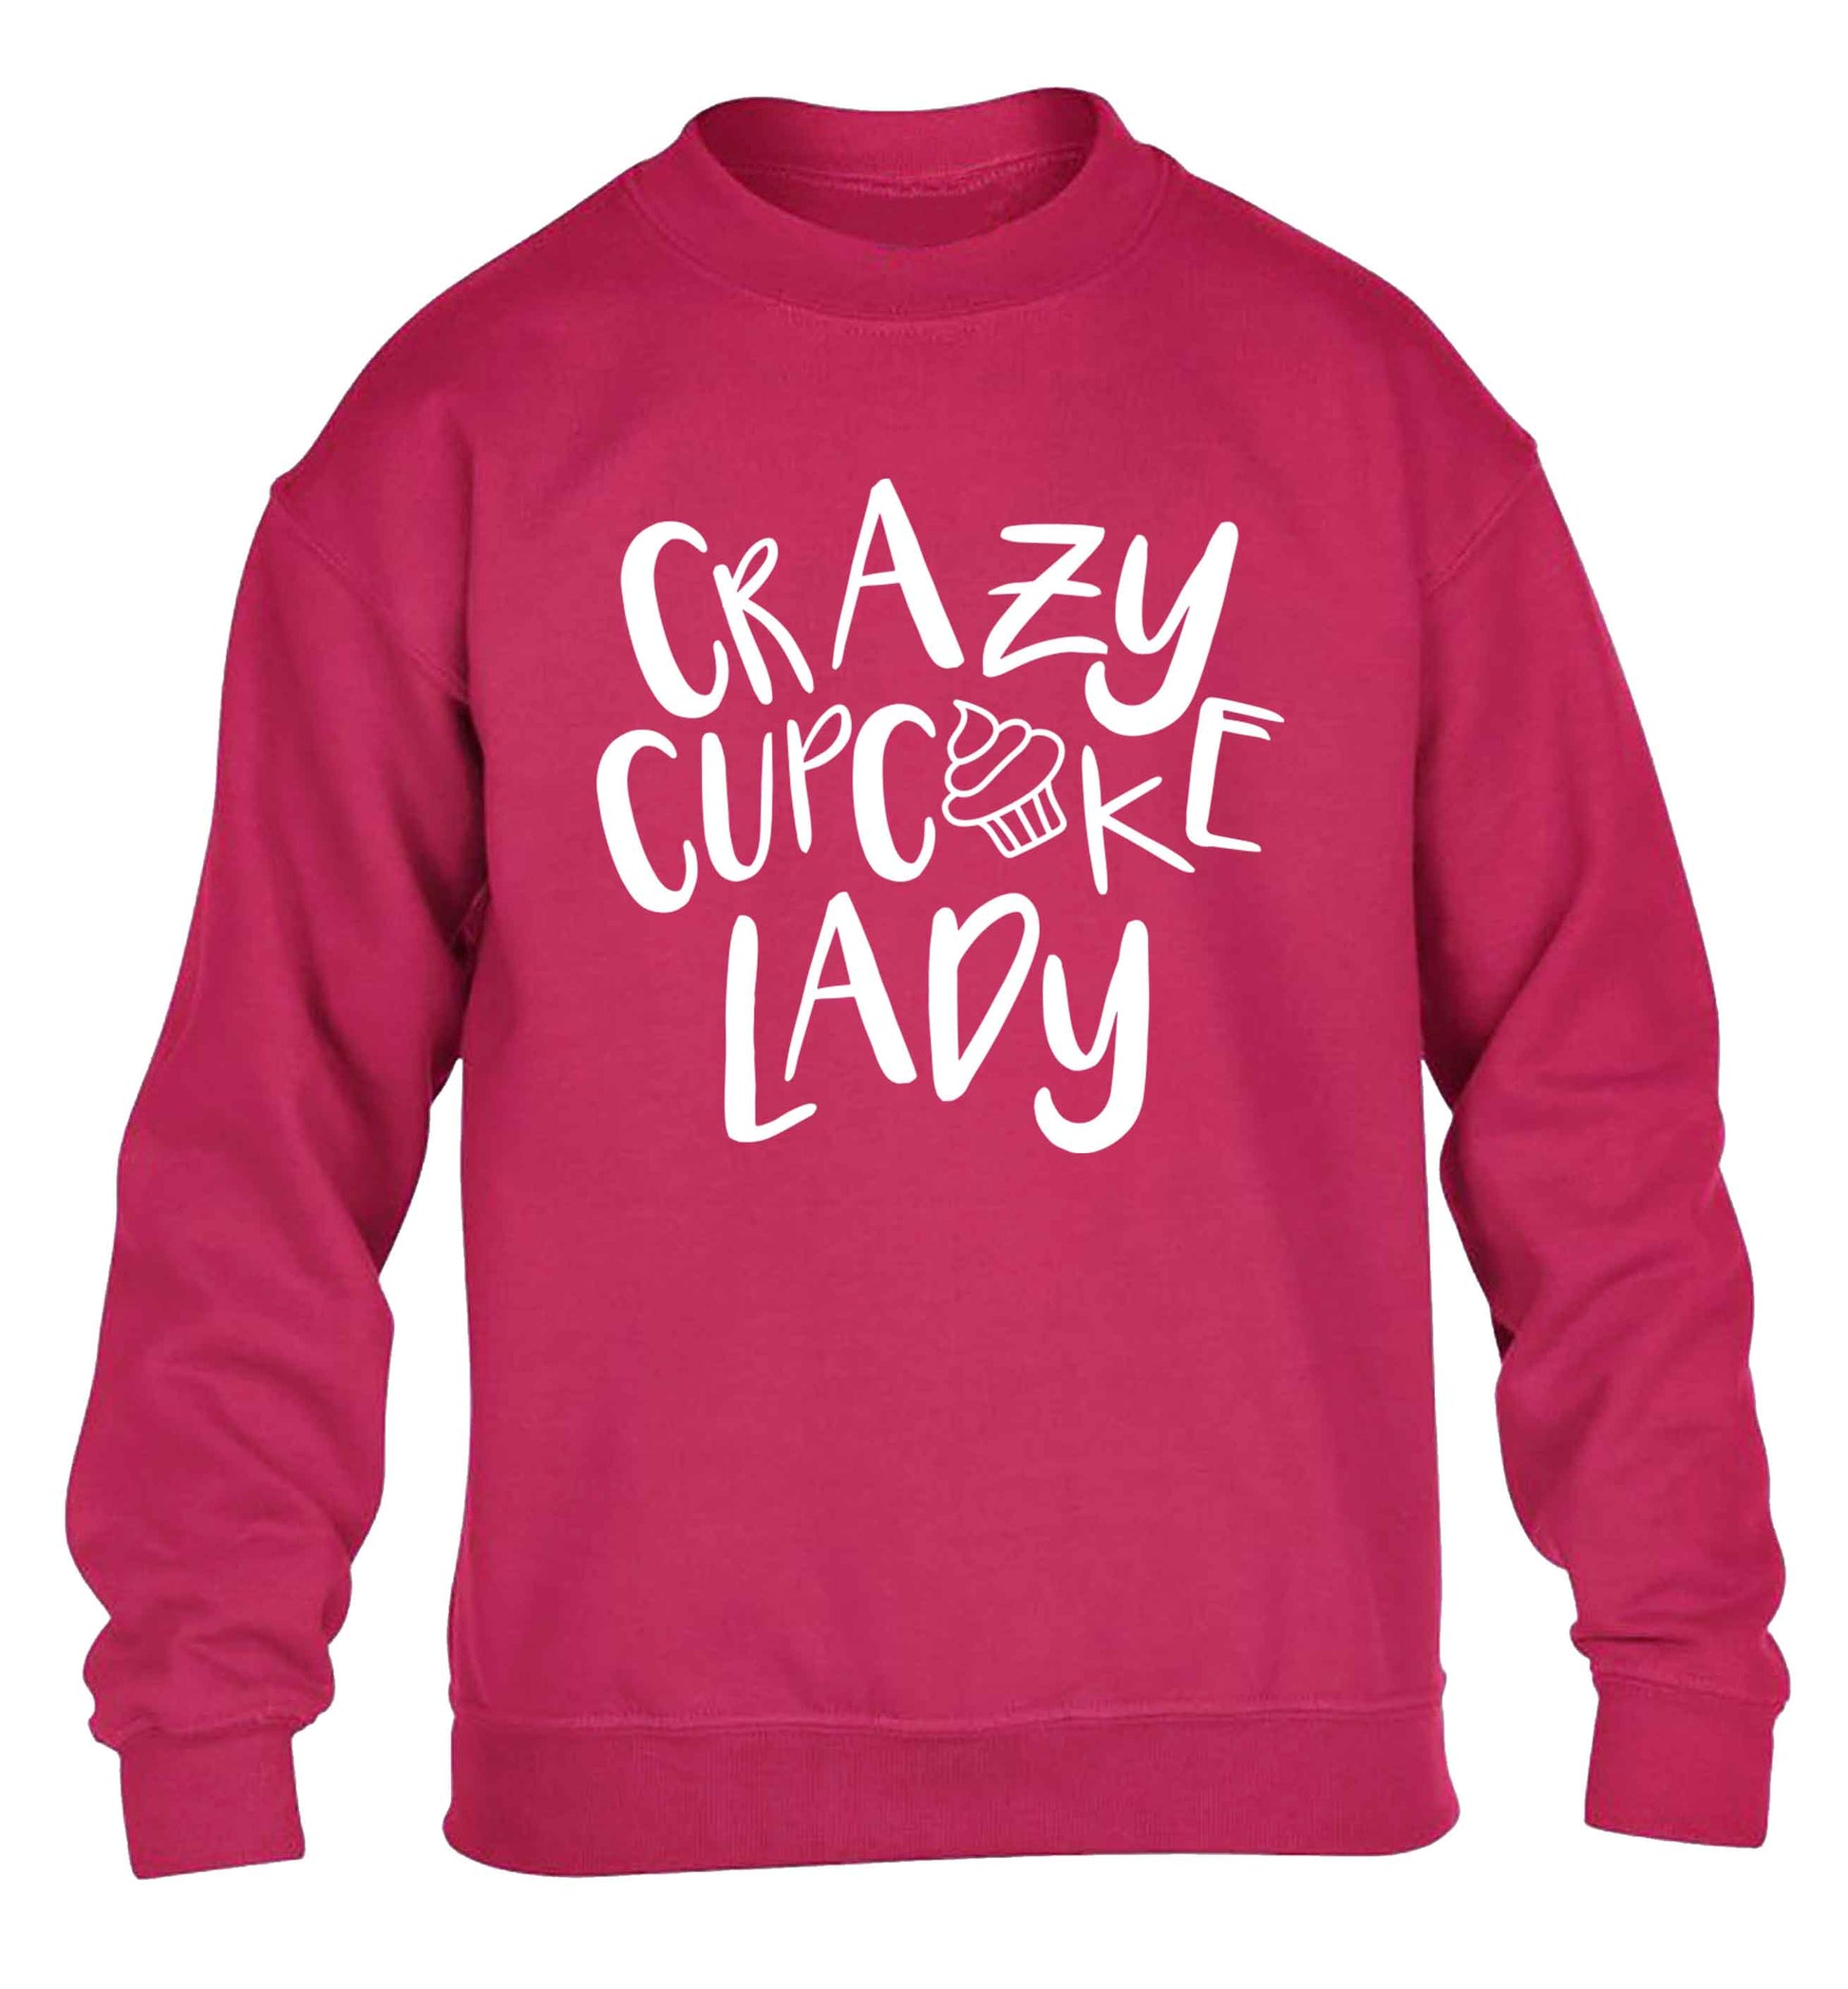 Crazy cupcake lady children's pink sweater 12-13 Years